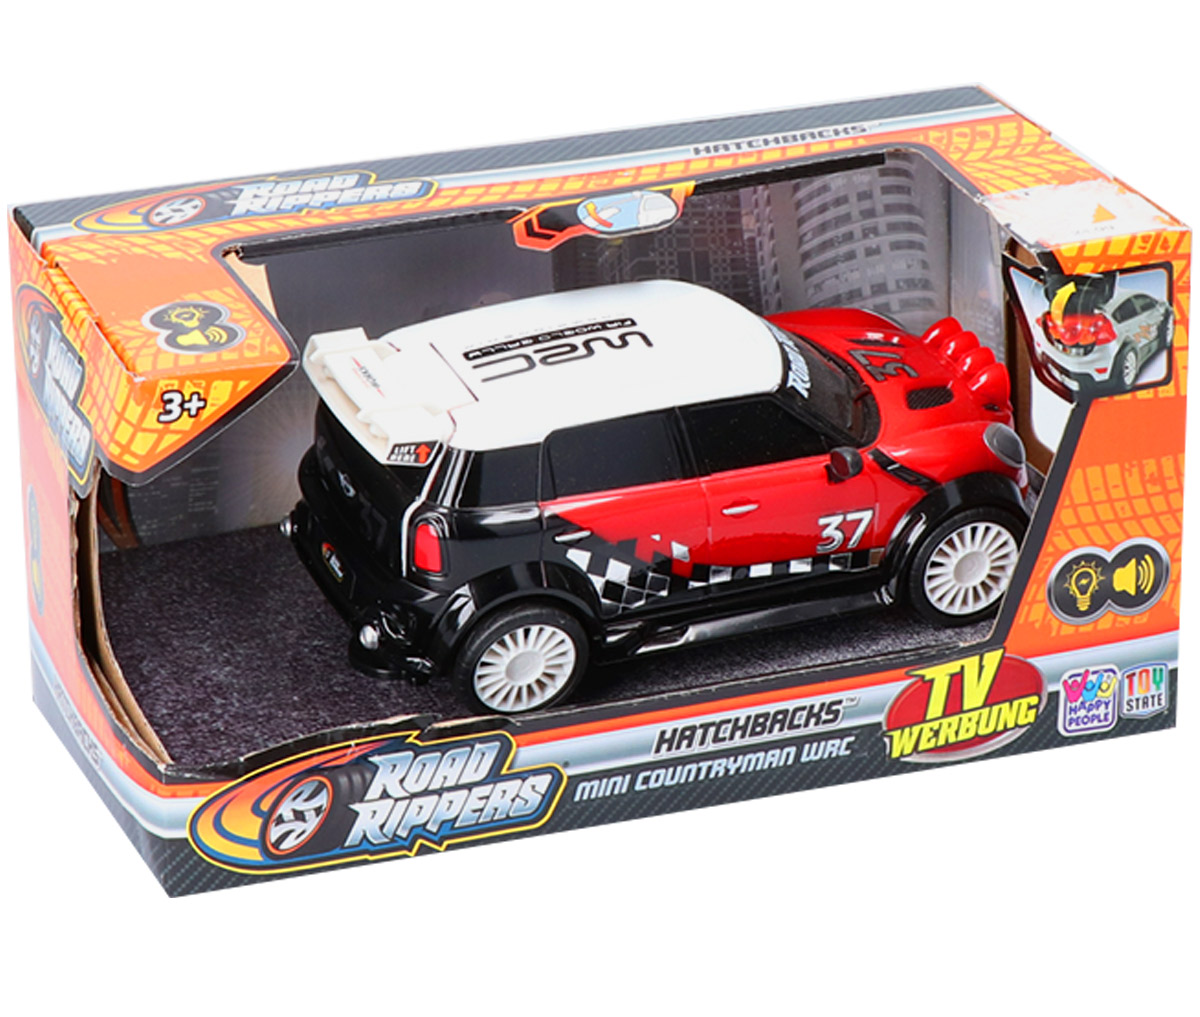 Nikko Toy State Road Rippers Hatchbacks Mini Countryman Happy People 35902 